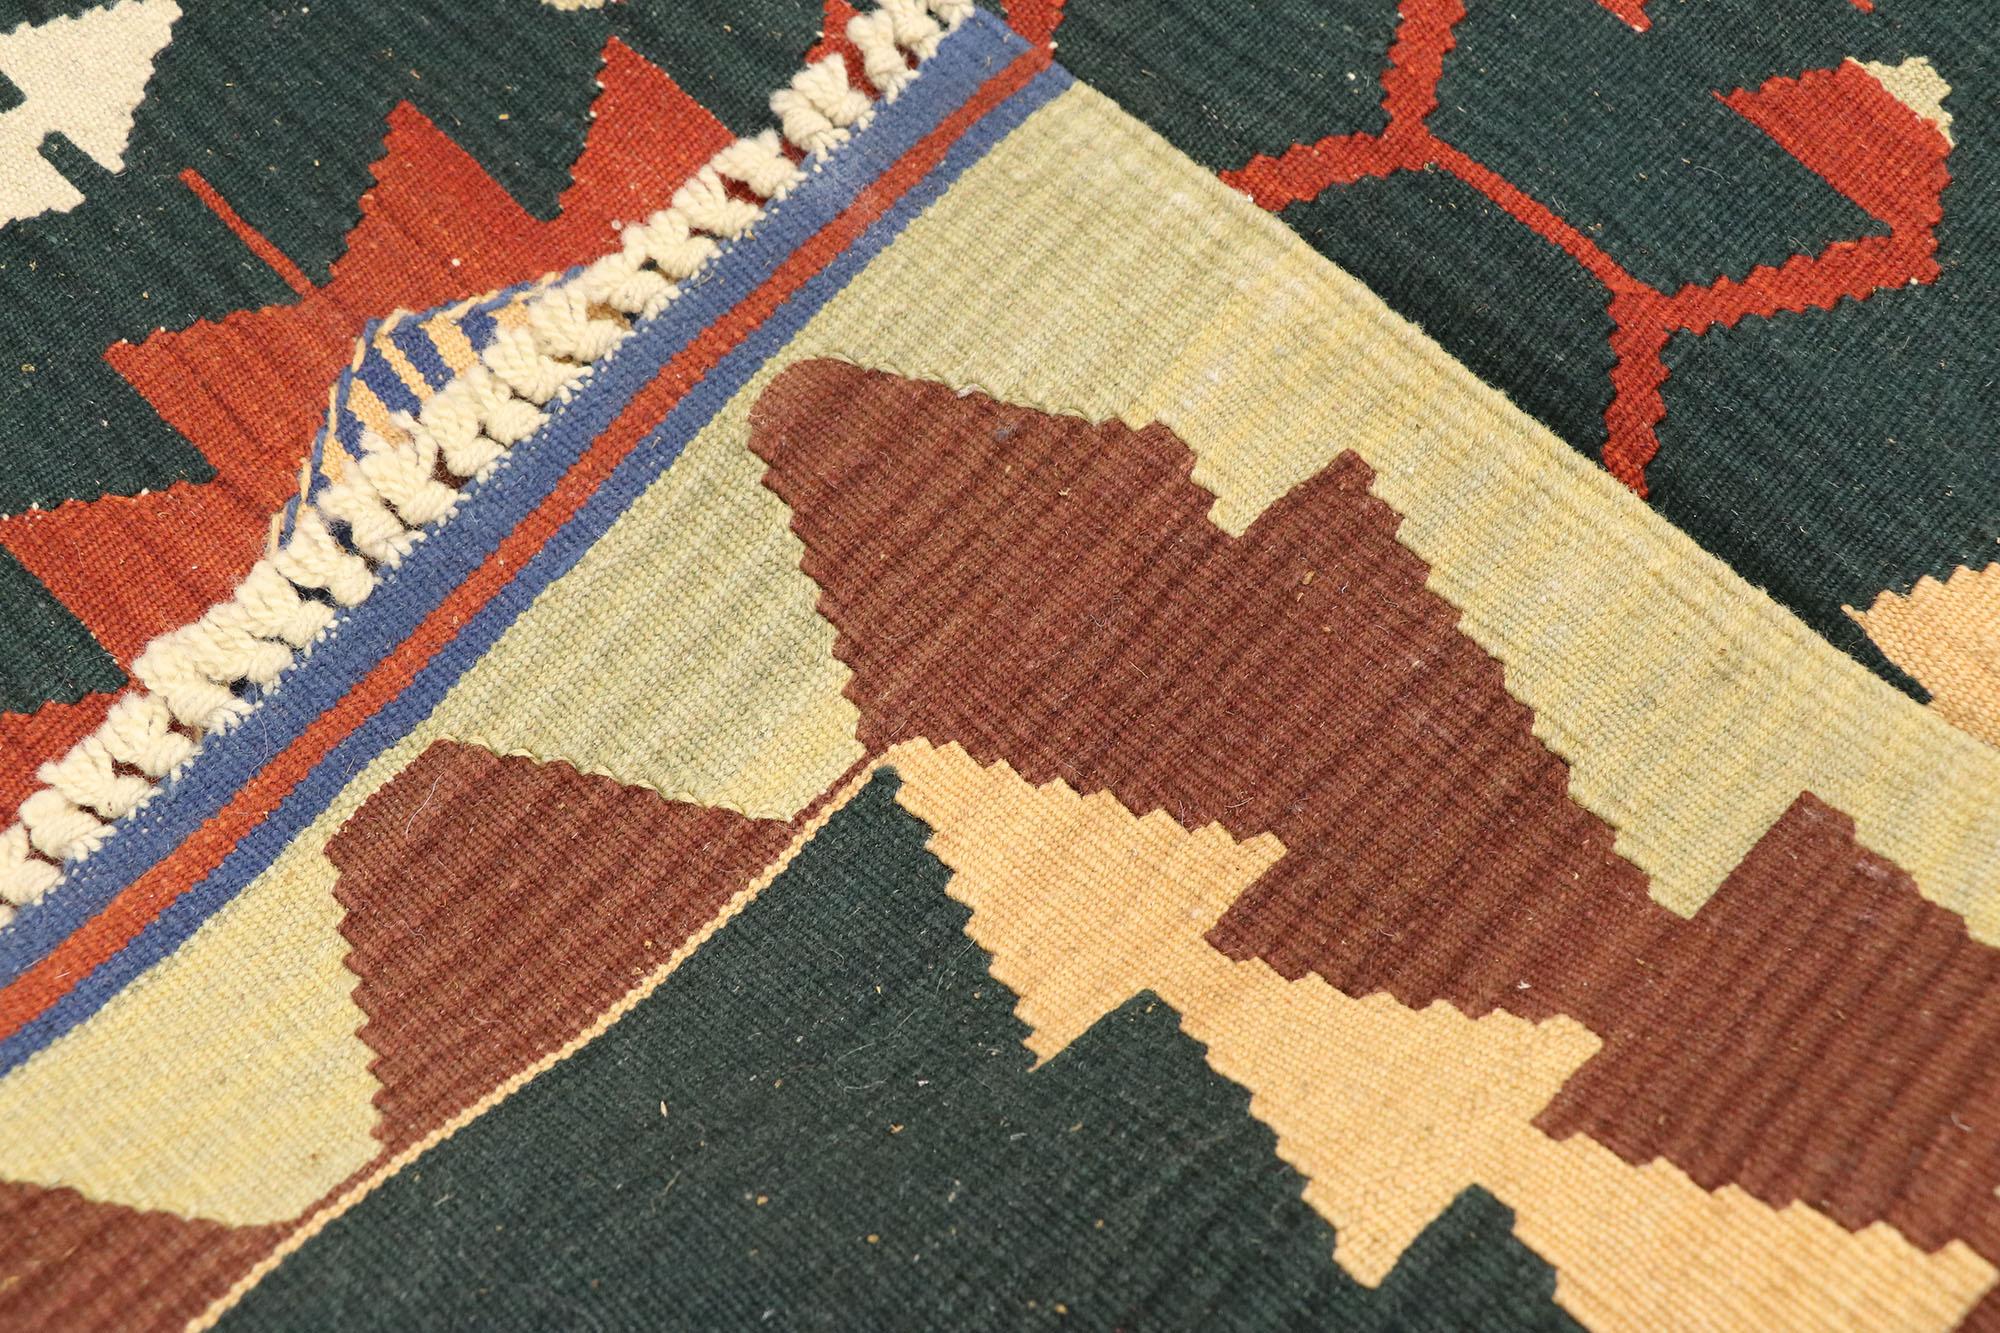 Vintage Persian Shiraz Kilim Rug, Western Chic Meets Southwest Bohemian In Good Condition For Sale In Dallas, TX